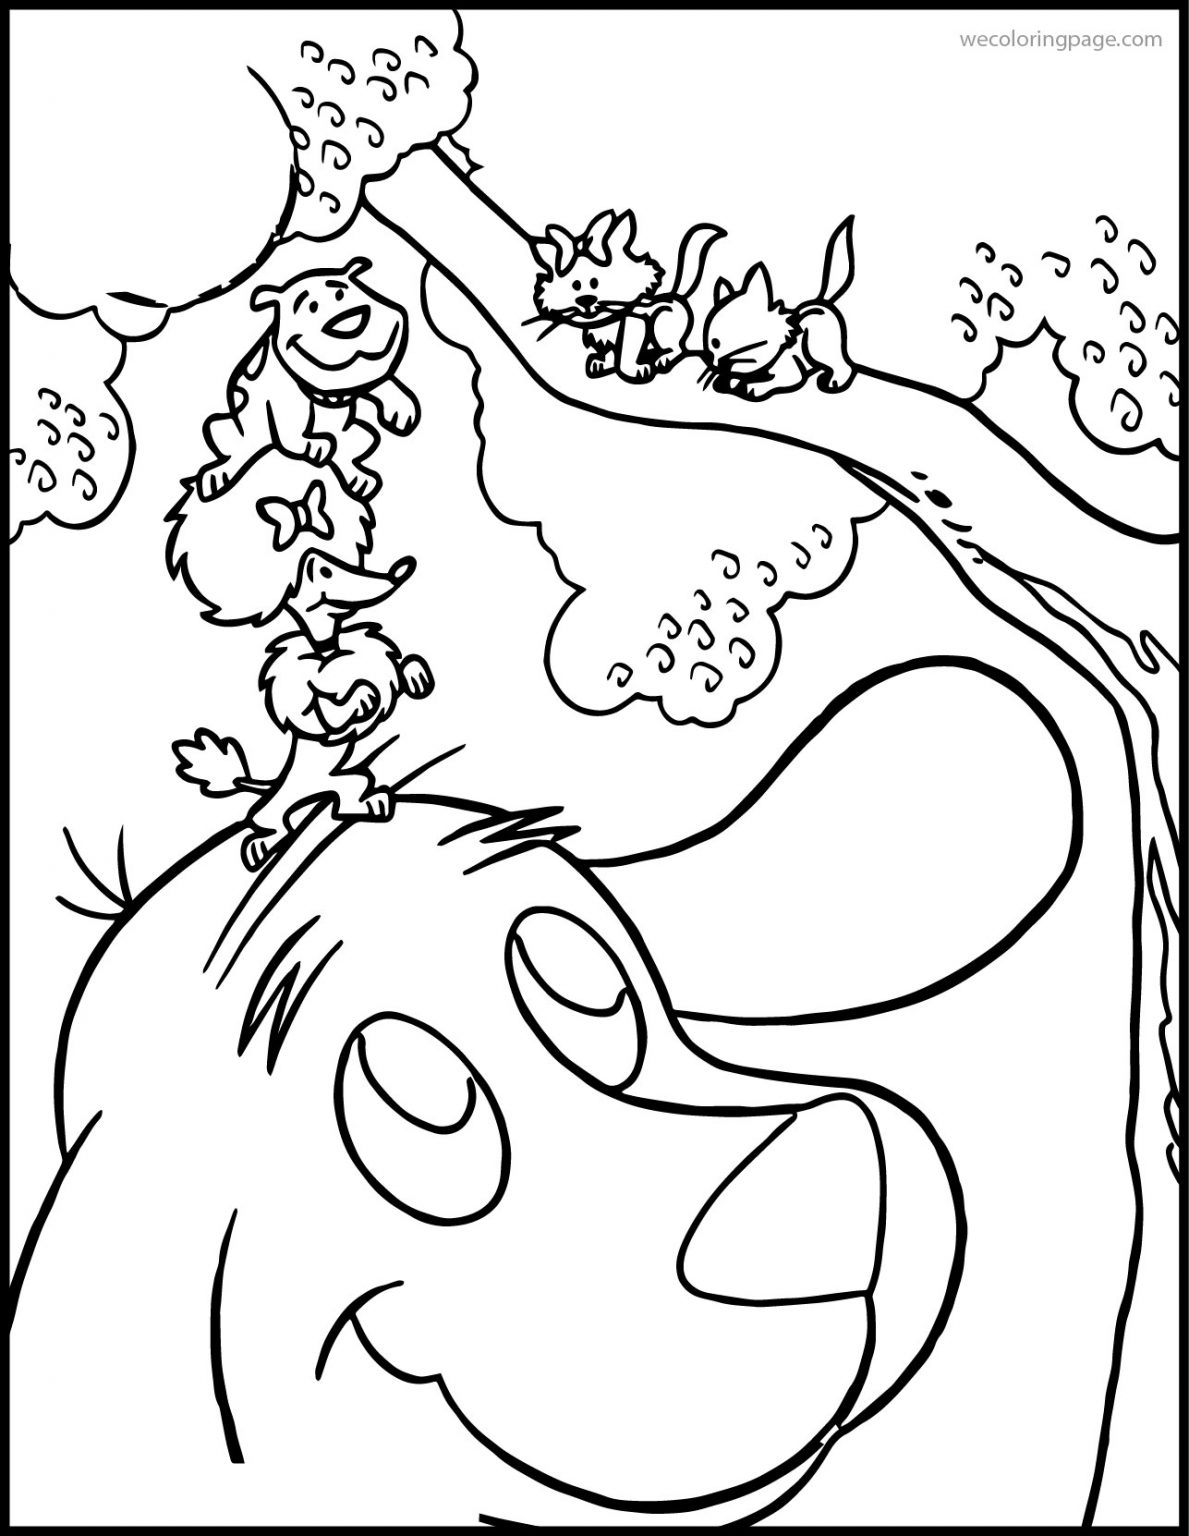 Fall The Simpsons Coloring Page - Wecoloringpage.com